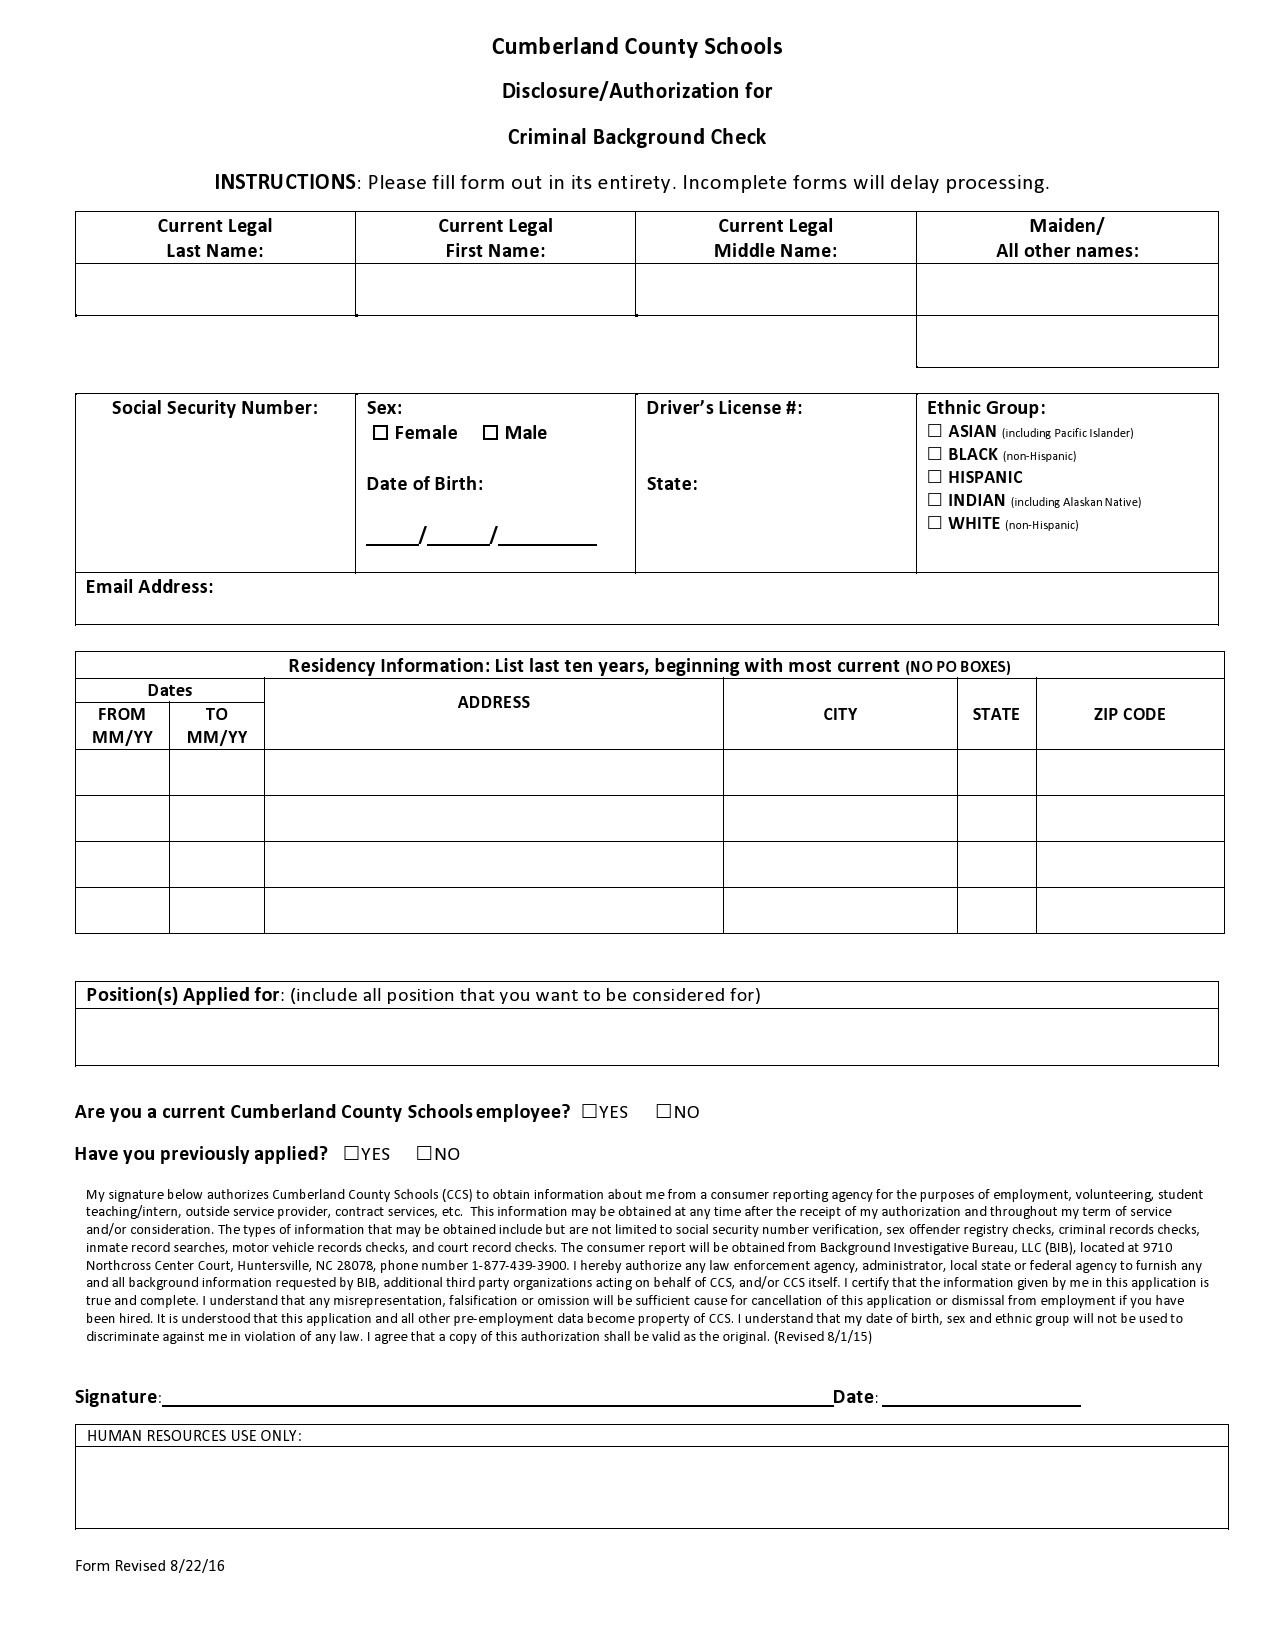 47-free-background-check-authorization-forms-templatelab